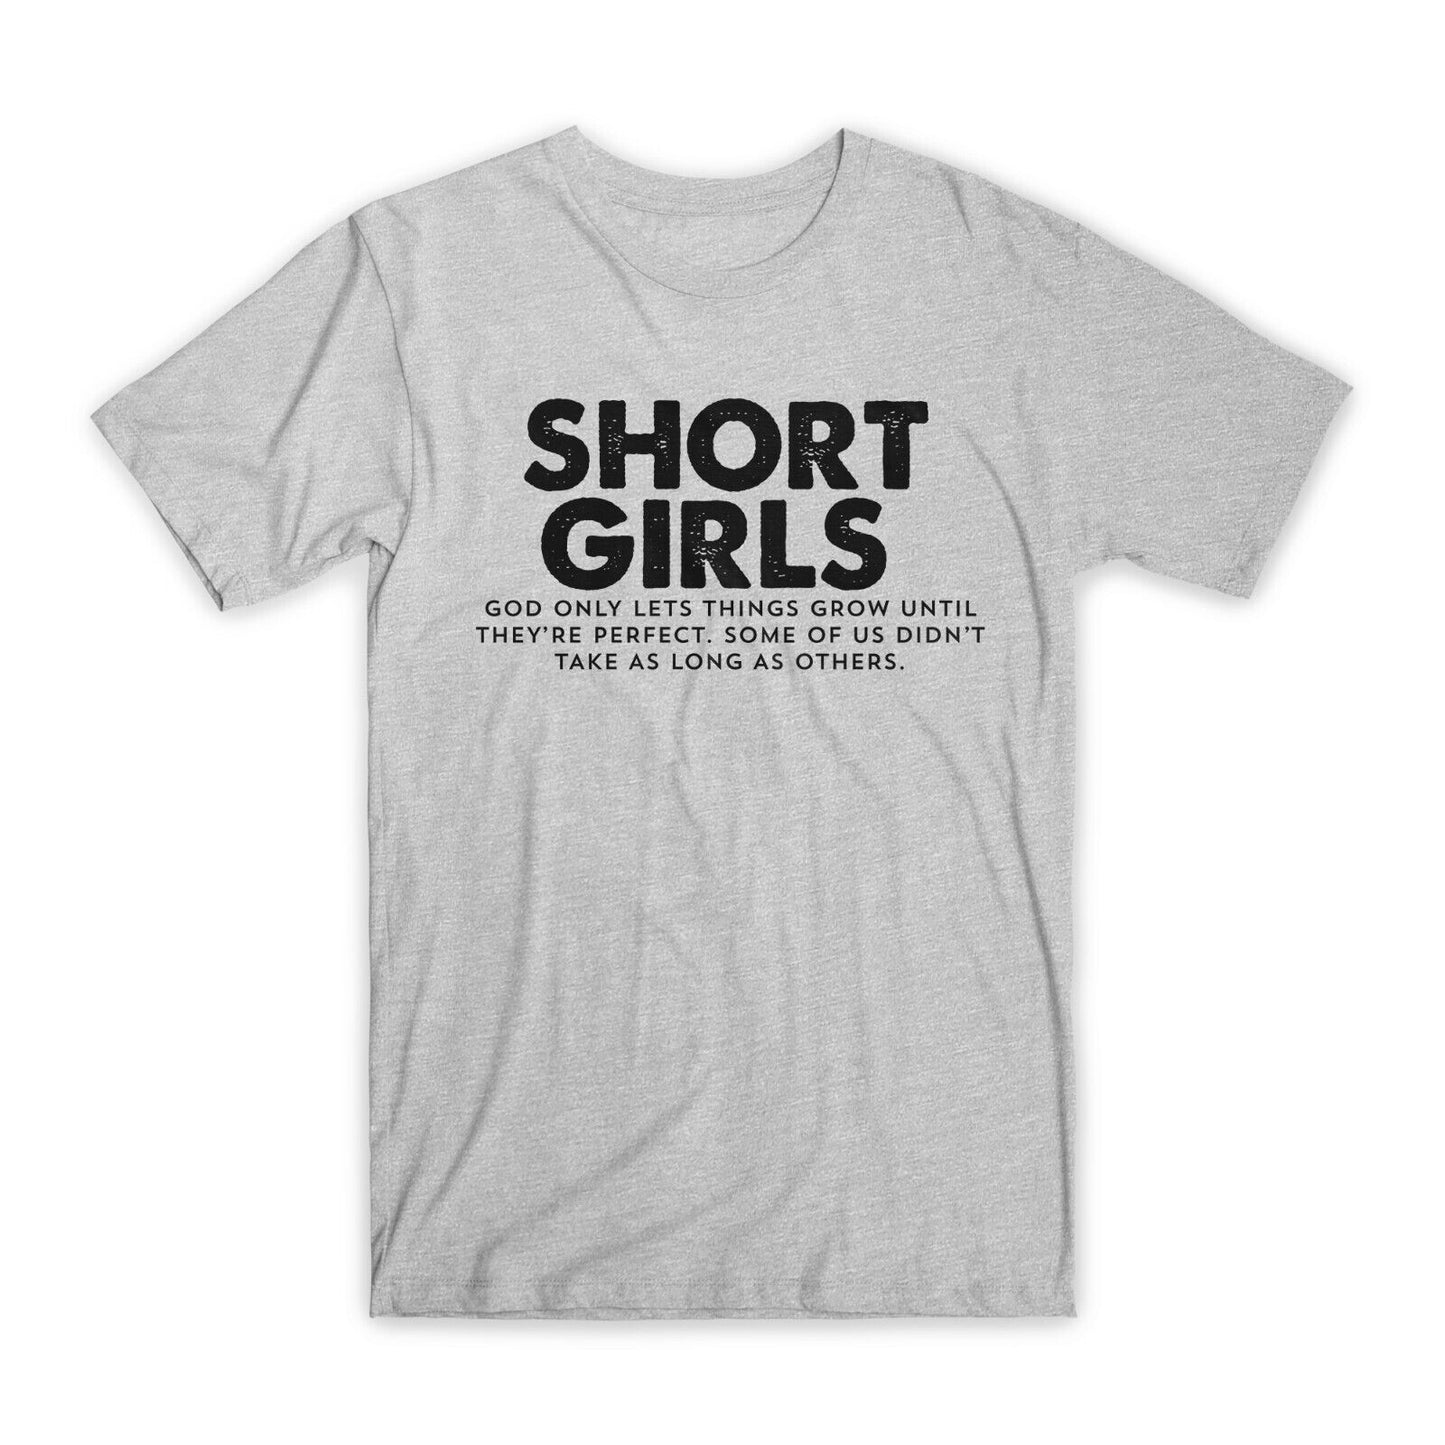 Short Girls T-Shirt Premium Soft Cotton Crew Neck Funny Tees Novelty Gifts NEW